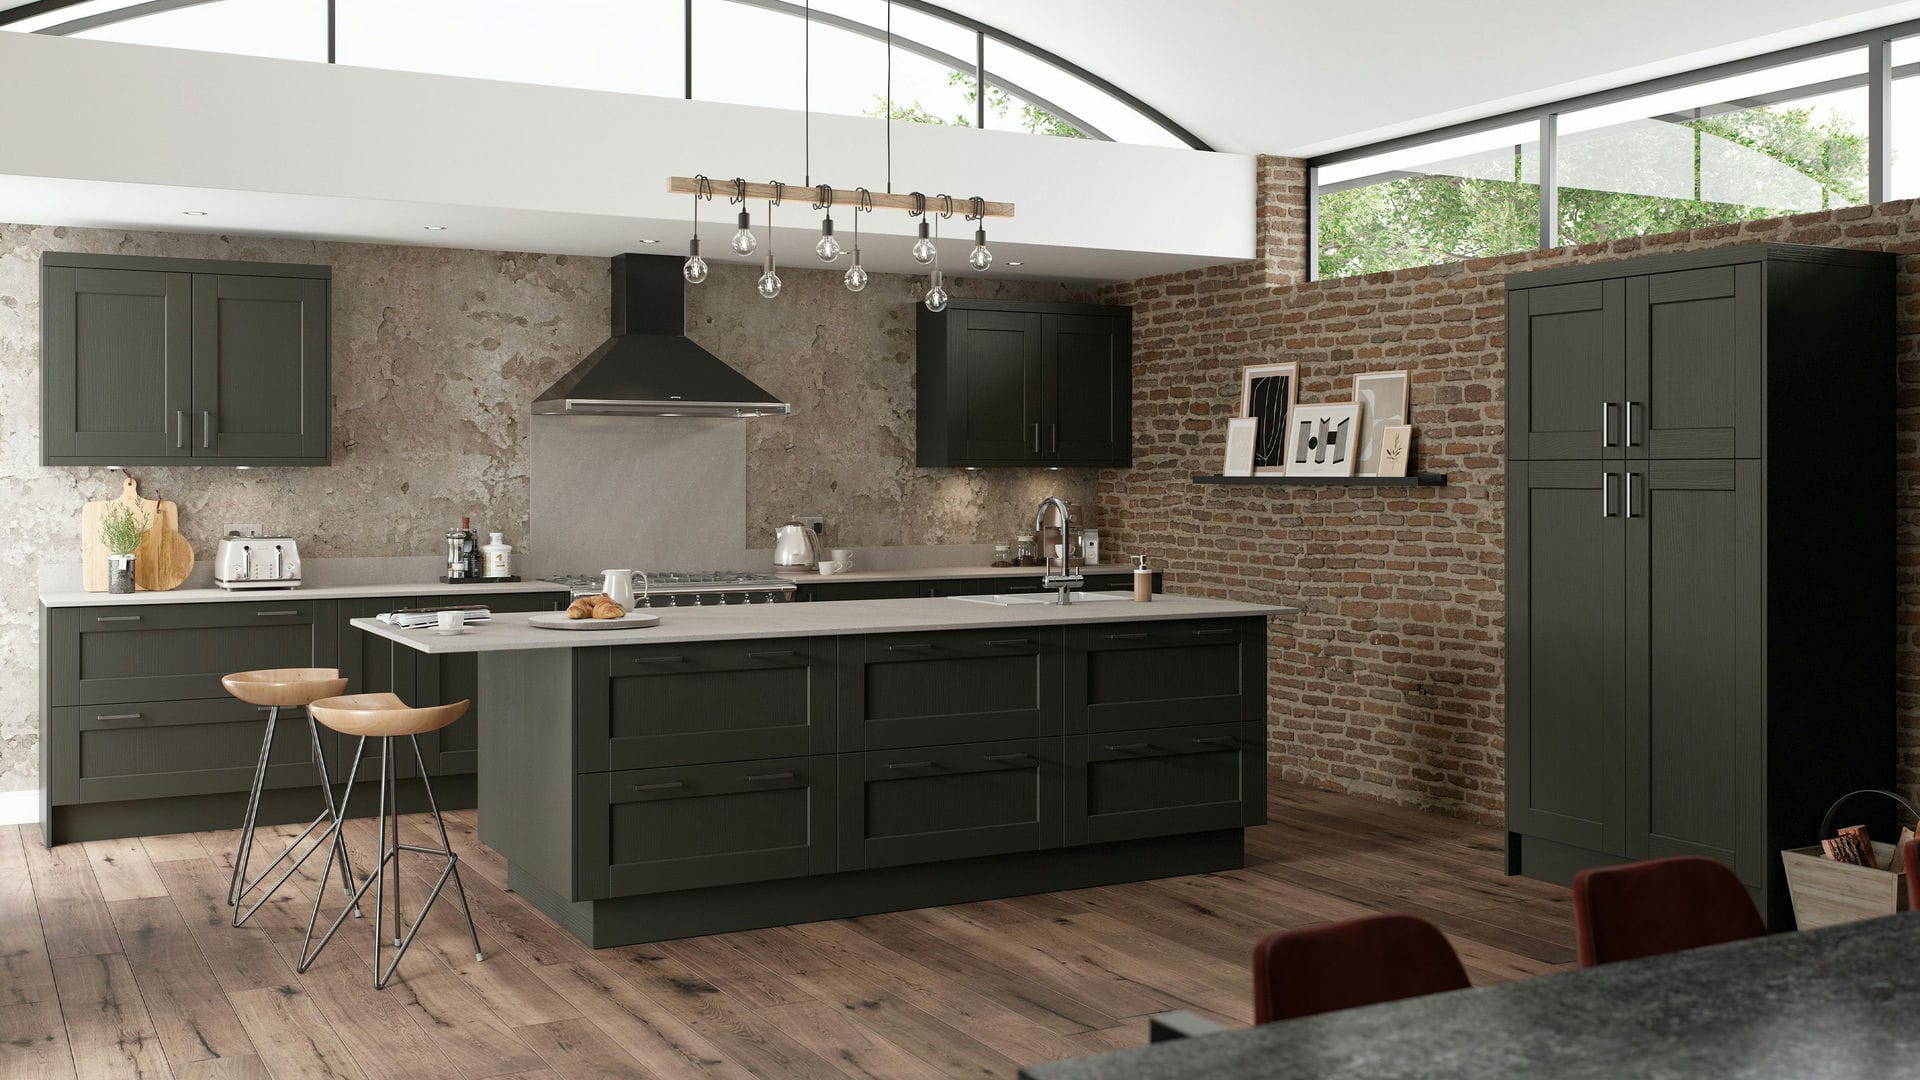 Modern shaker graphite kitchens updating the traditional shaker with a chic and dramatic graphite finish